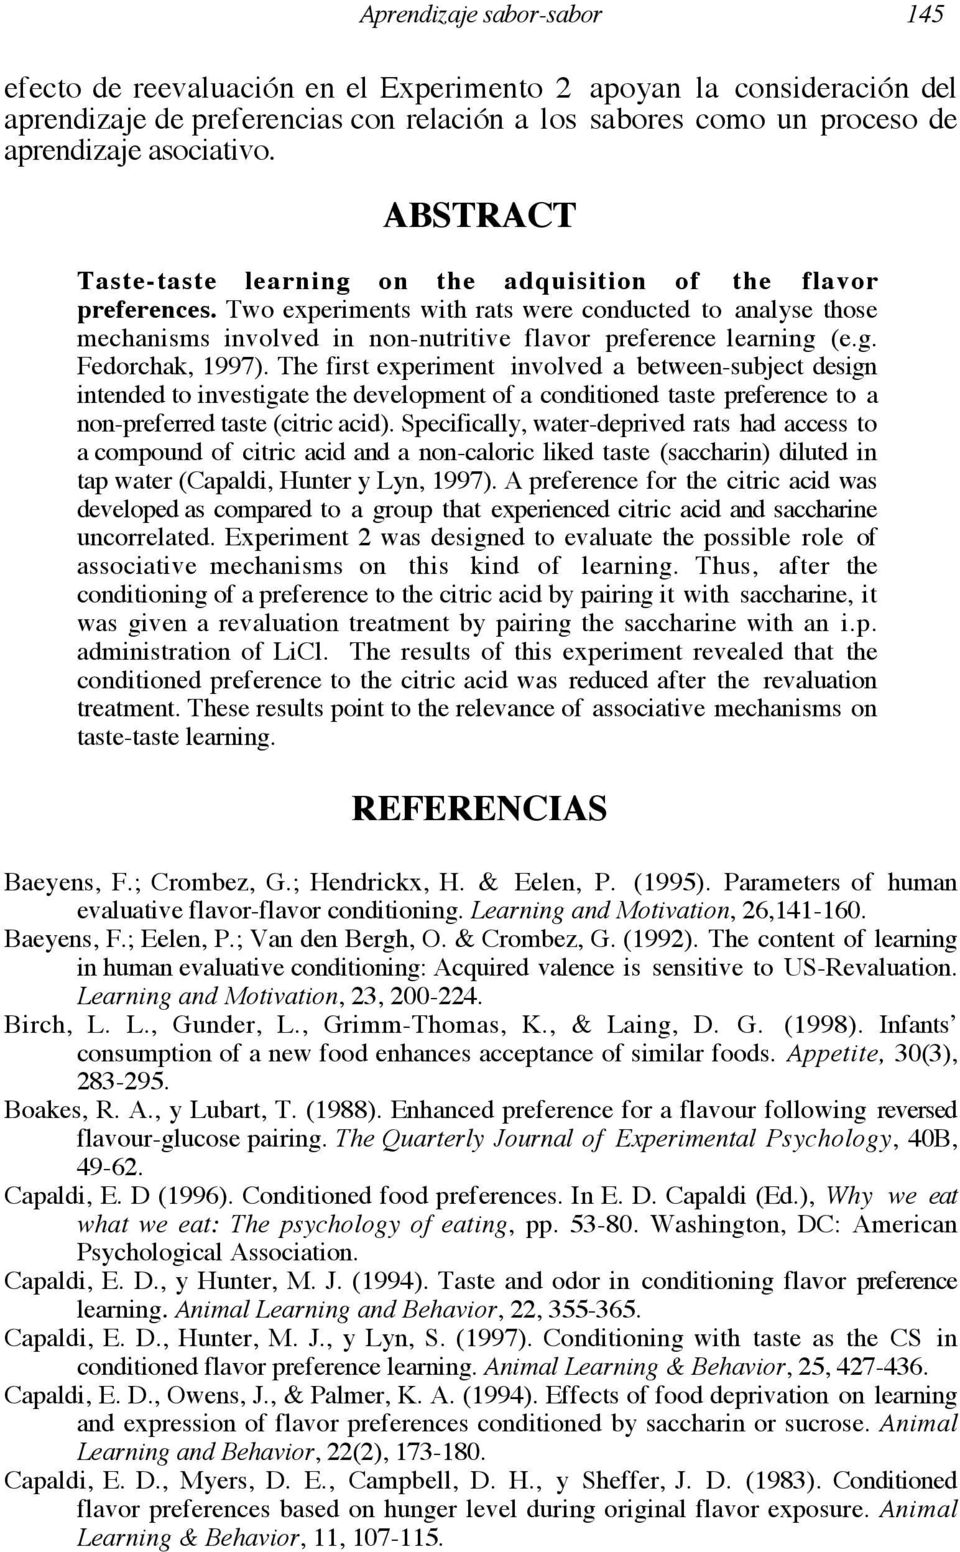 Two experiments with rats were conducted to analyse those mechanisms involved in non-nutritive flavor preference learning (e.g. Fedorchak, 1997).